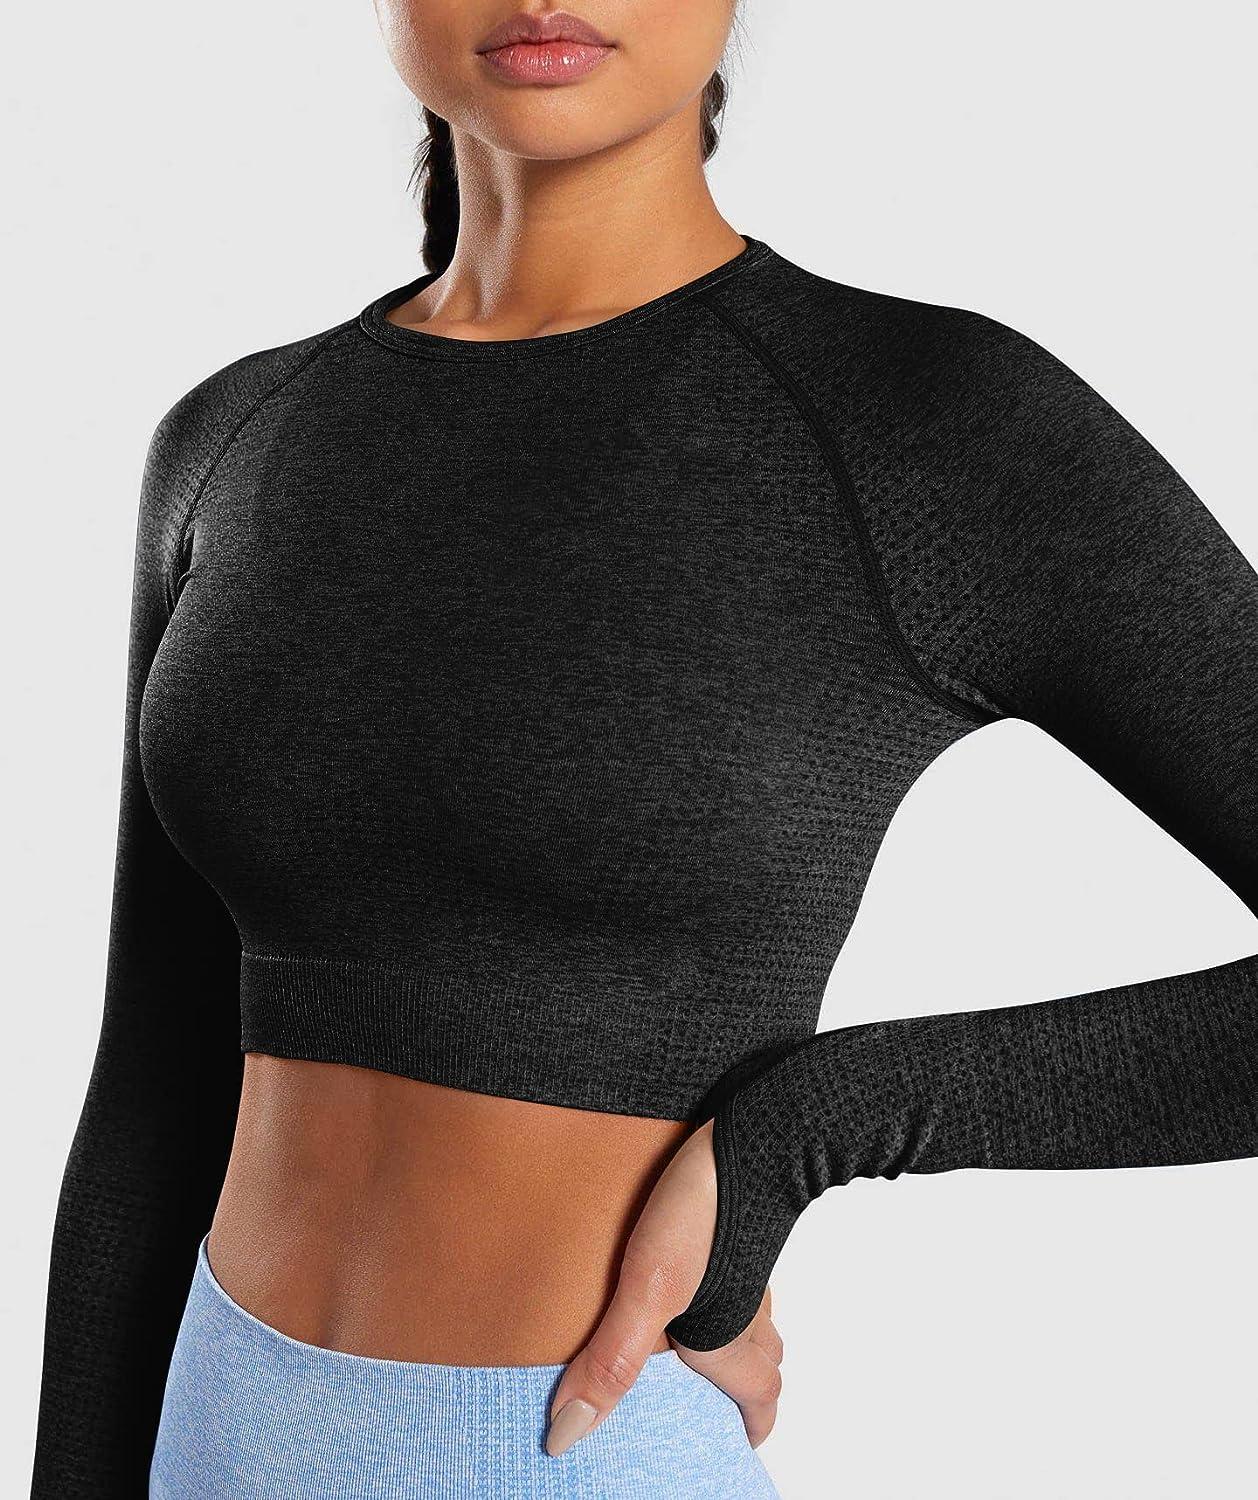  Women Workout Crop Top Short Sleeve Seamless Athletic Shirt  Yoga Fitness Tight Tee Gym Cropped Tank Tops (Small) Black, Gray : Clothing,  Shoes & Jewelry